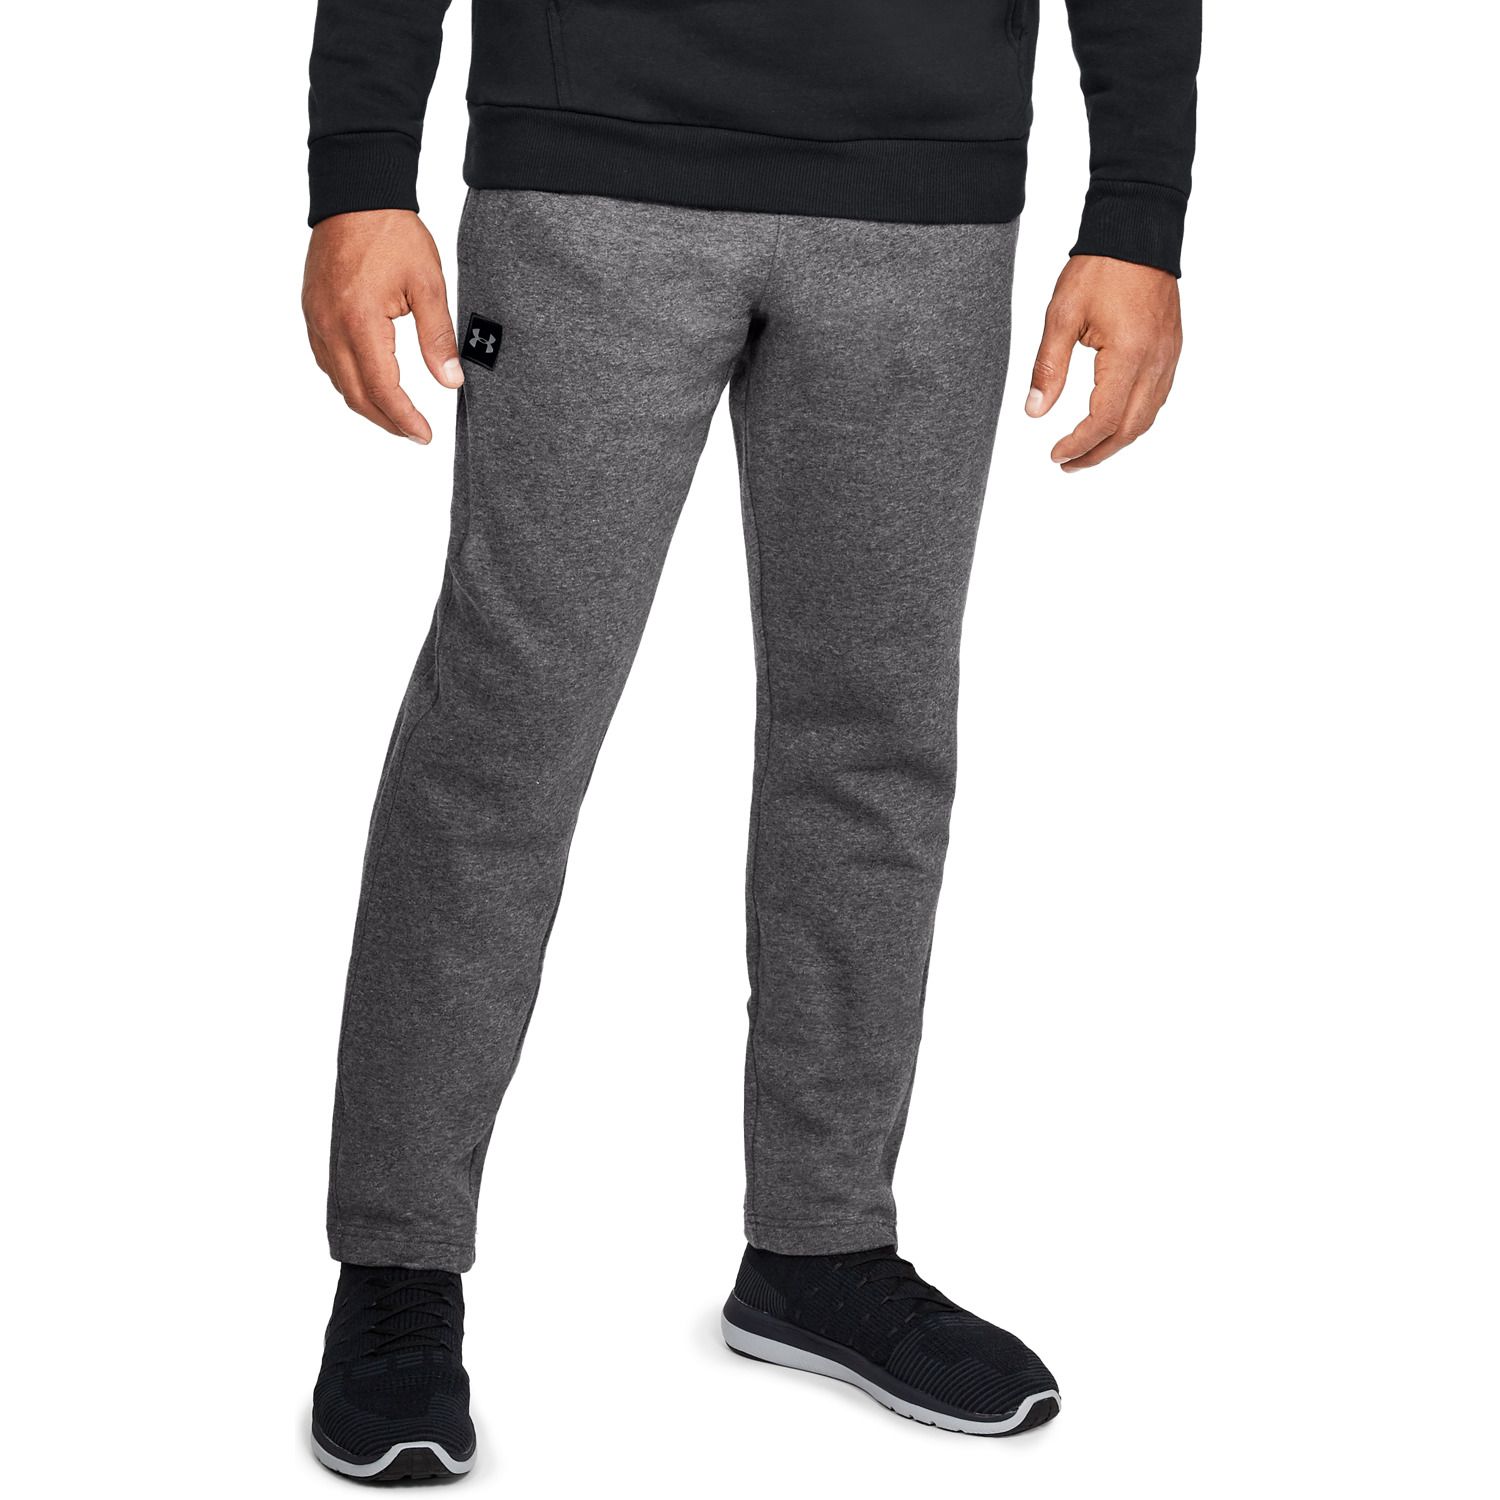 Clearance Men's Under Armour Clothing 